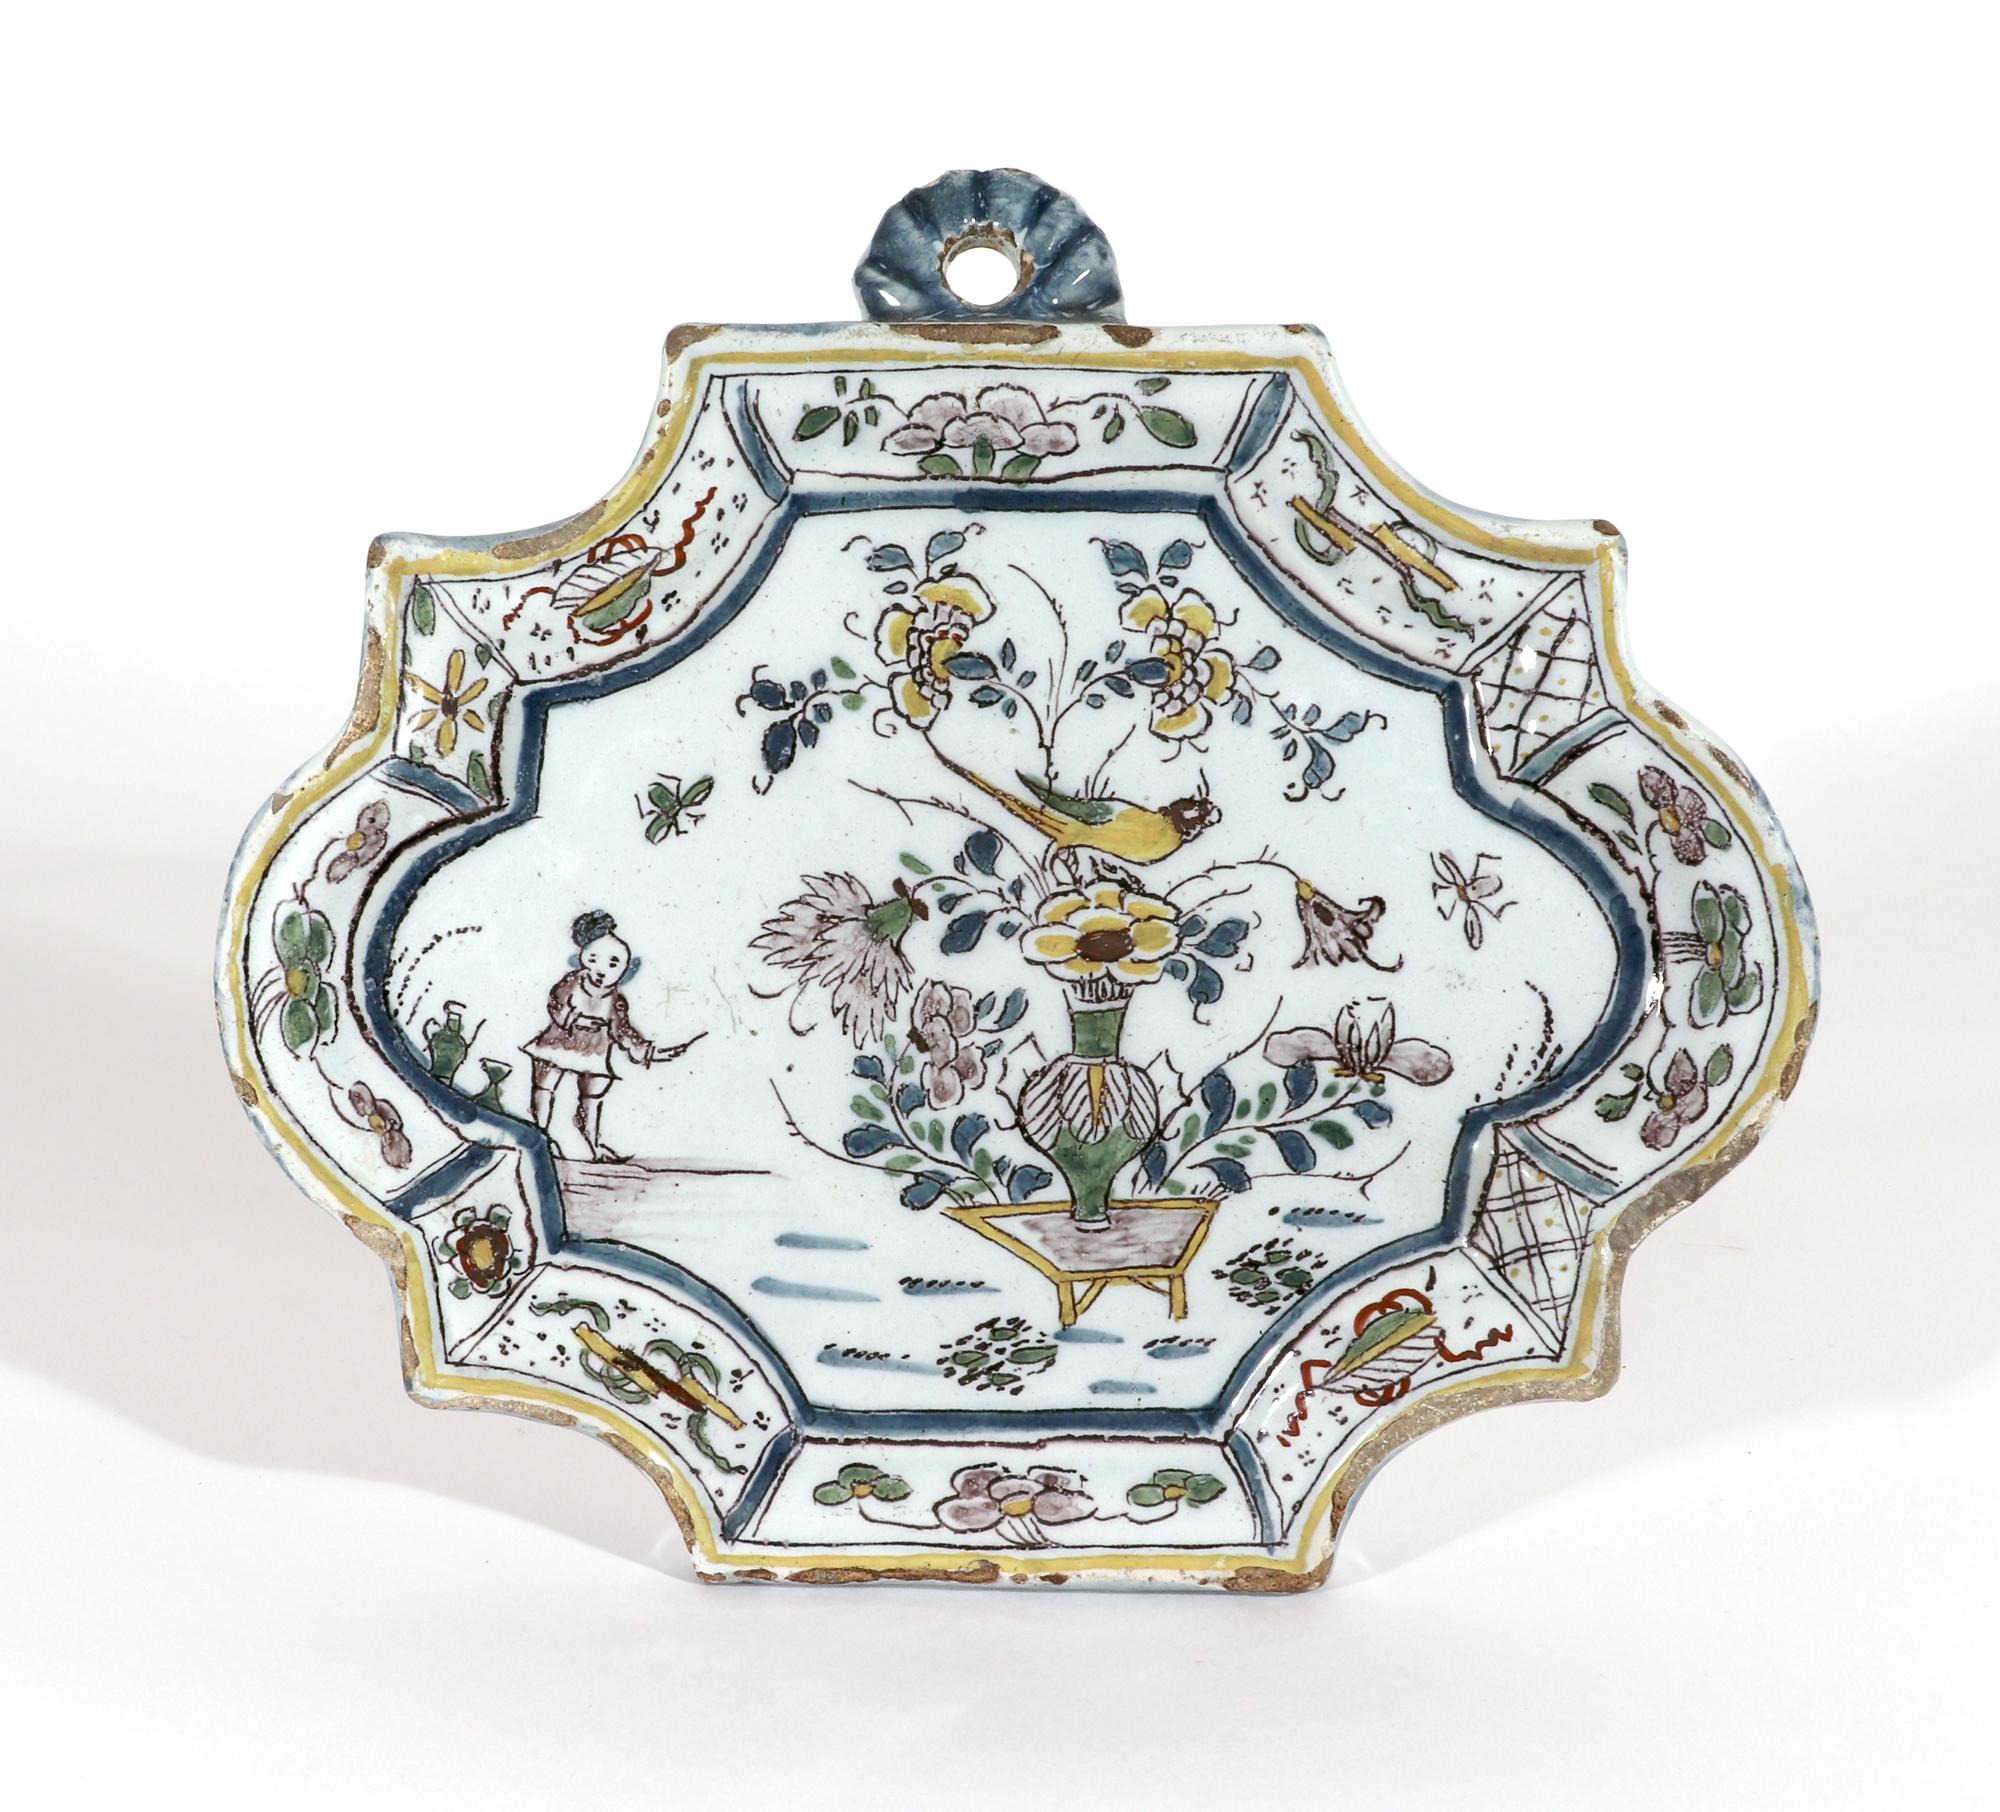 Dutch Delft shaped Chinoiserie Polychrome plaque,
Circa 1730-40

The shaped plaque has a raised molded border decorated with a series of alternating painted panels of flowers and Chinese auspicious objects. The central scene is painted with a